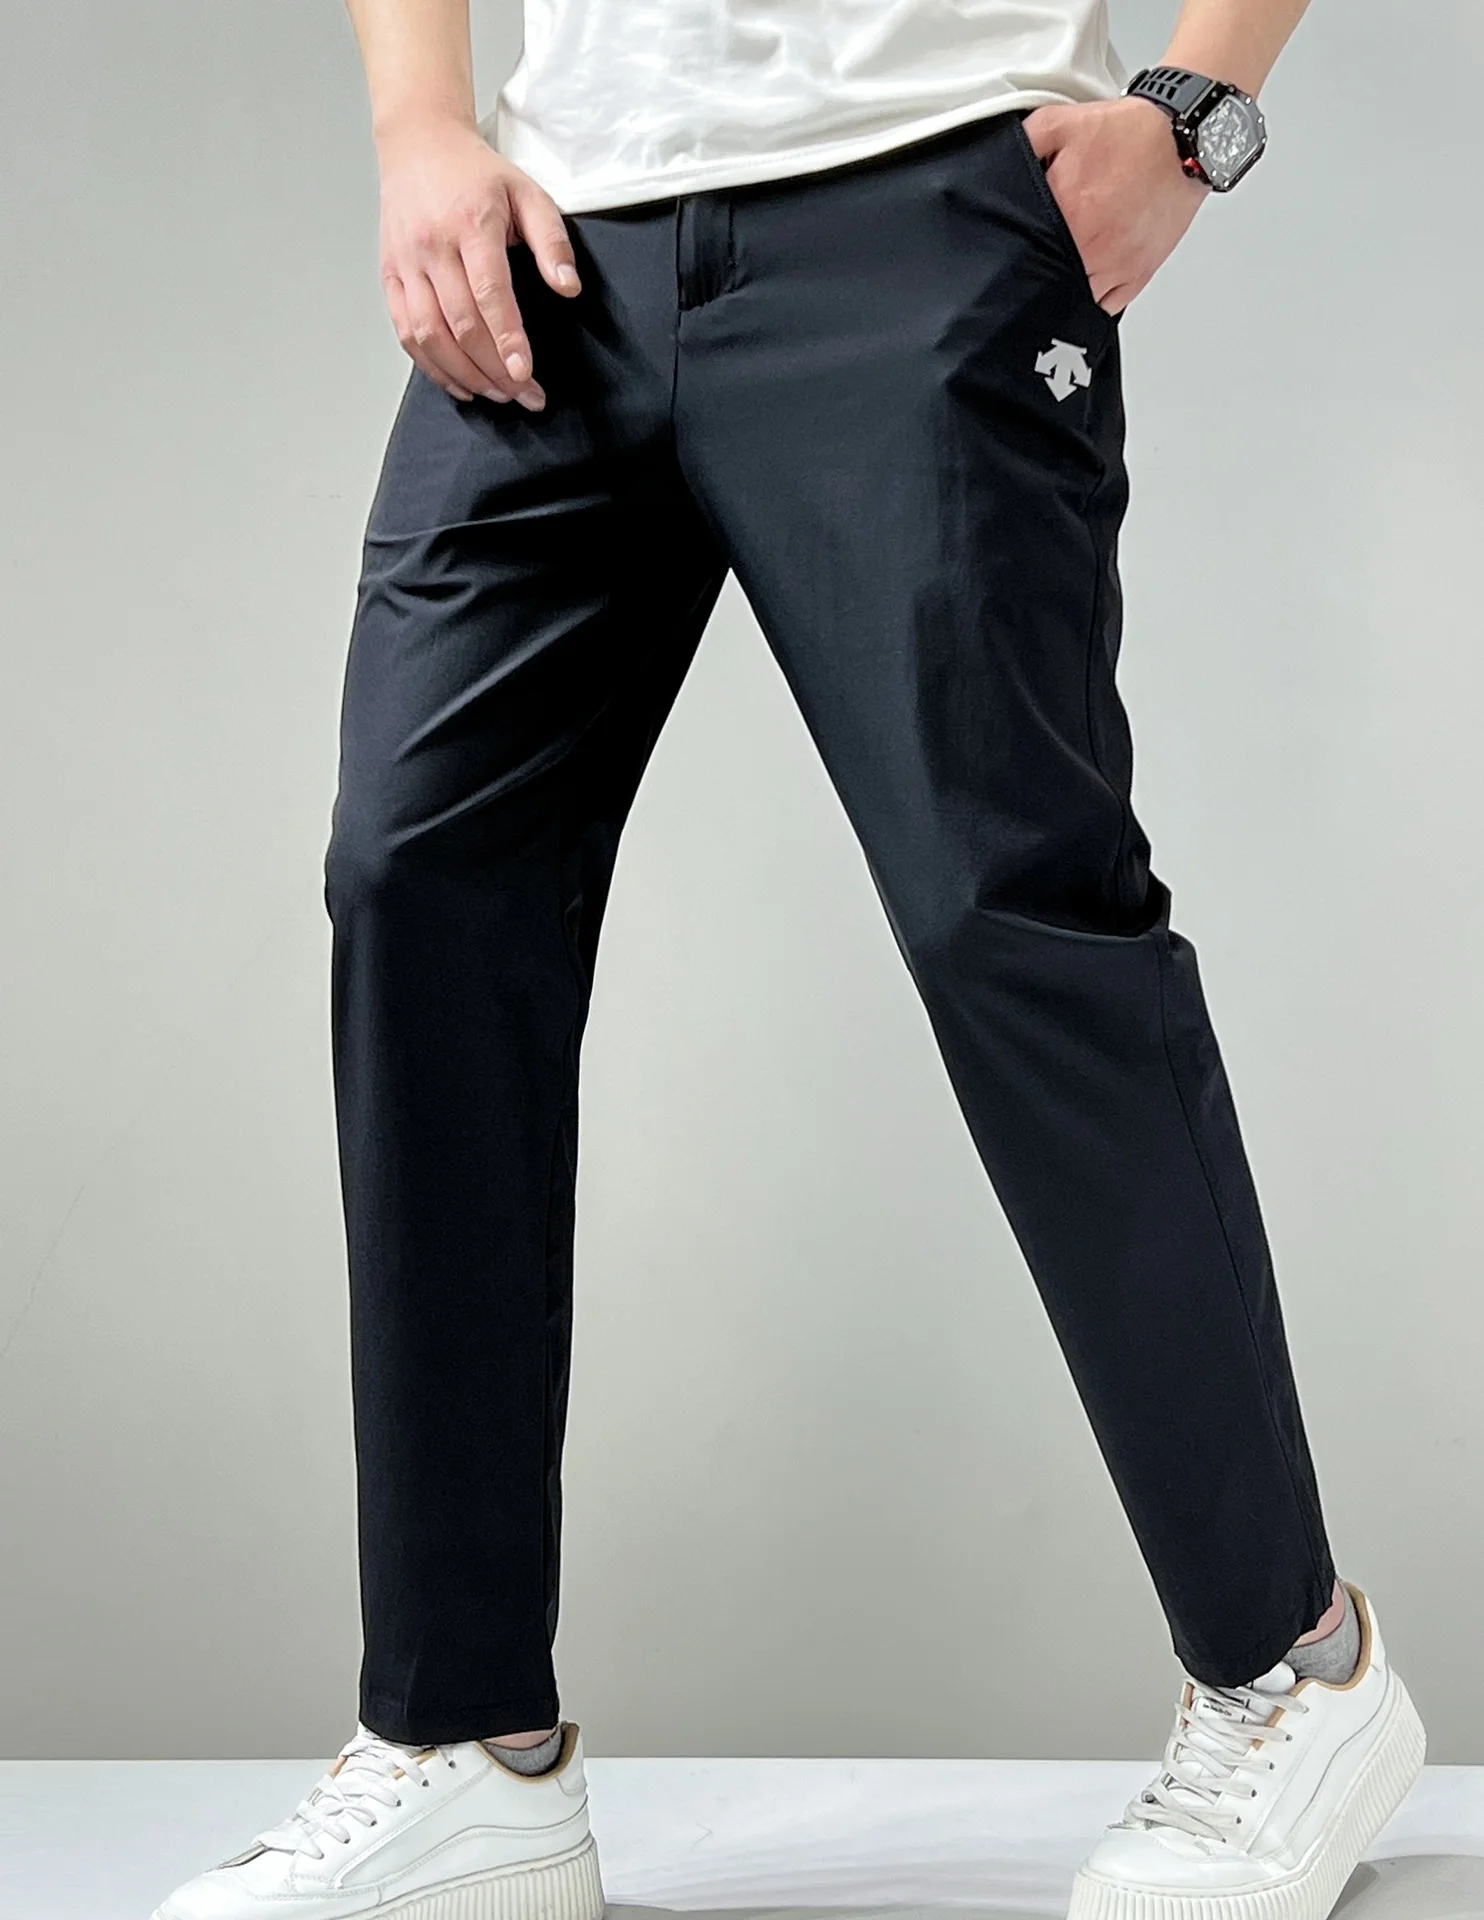 Autumn Thin and Breathable Golf Pants Men Lightweight Moisture Wick Golf Wear For Men Trousers Quick Drying men's golf clothing